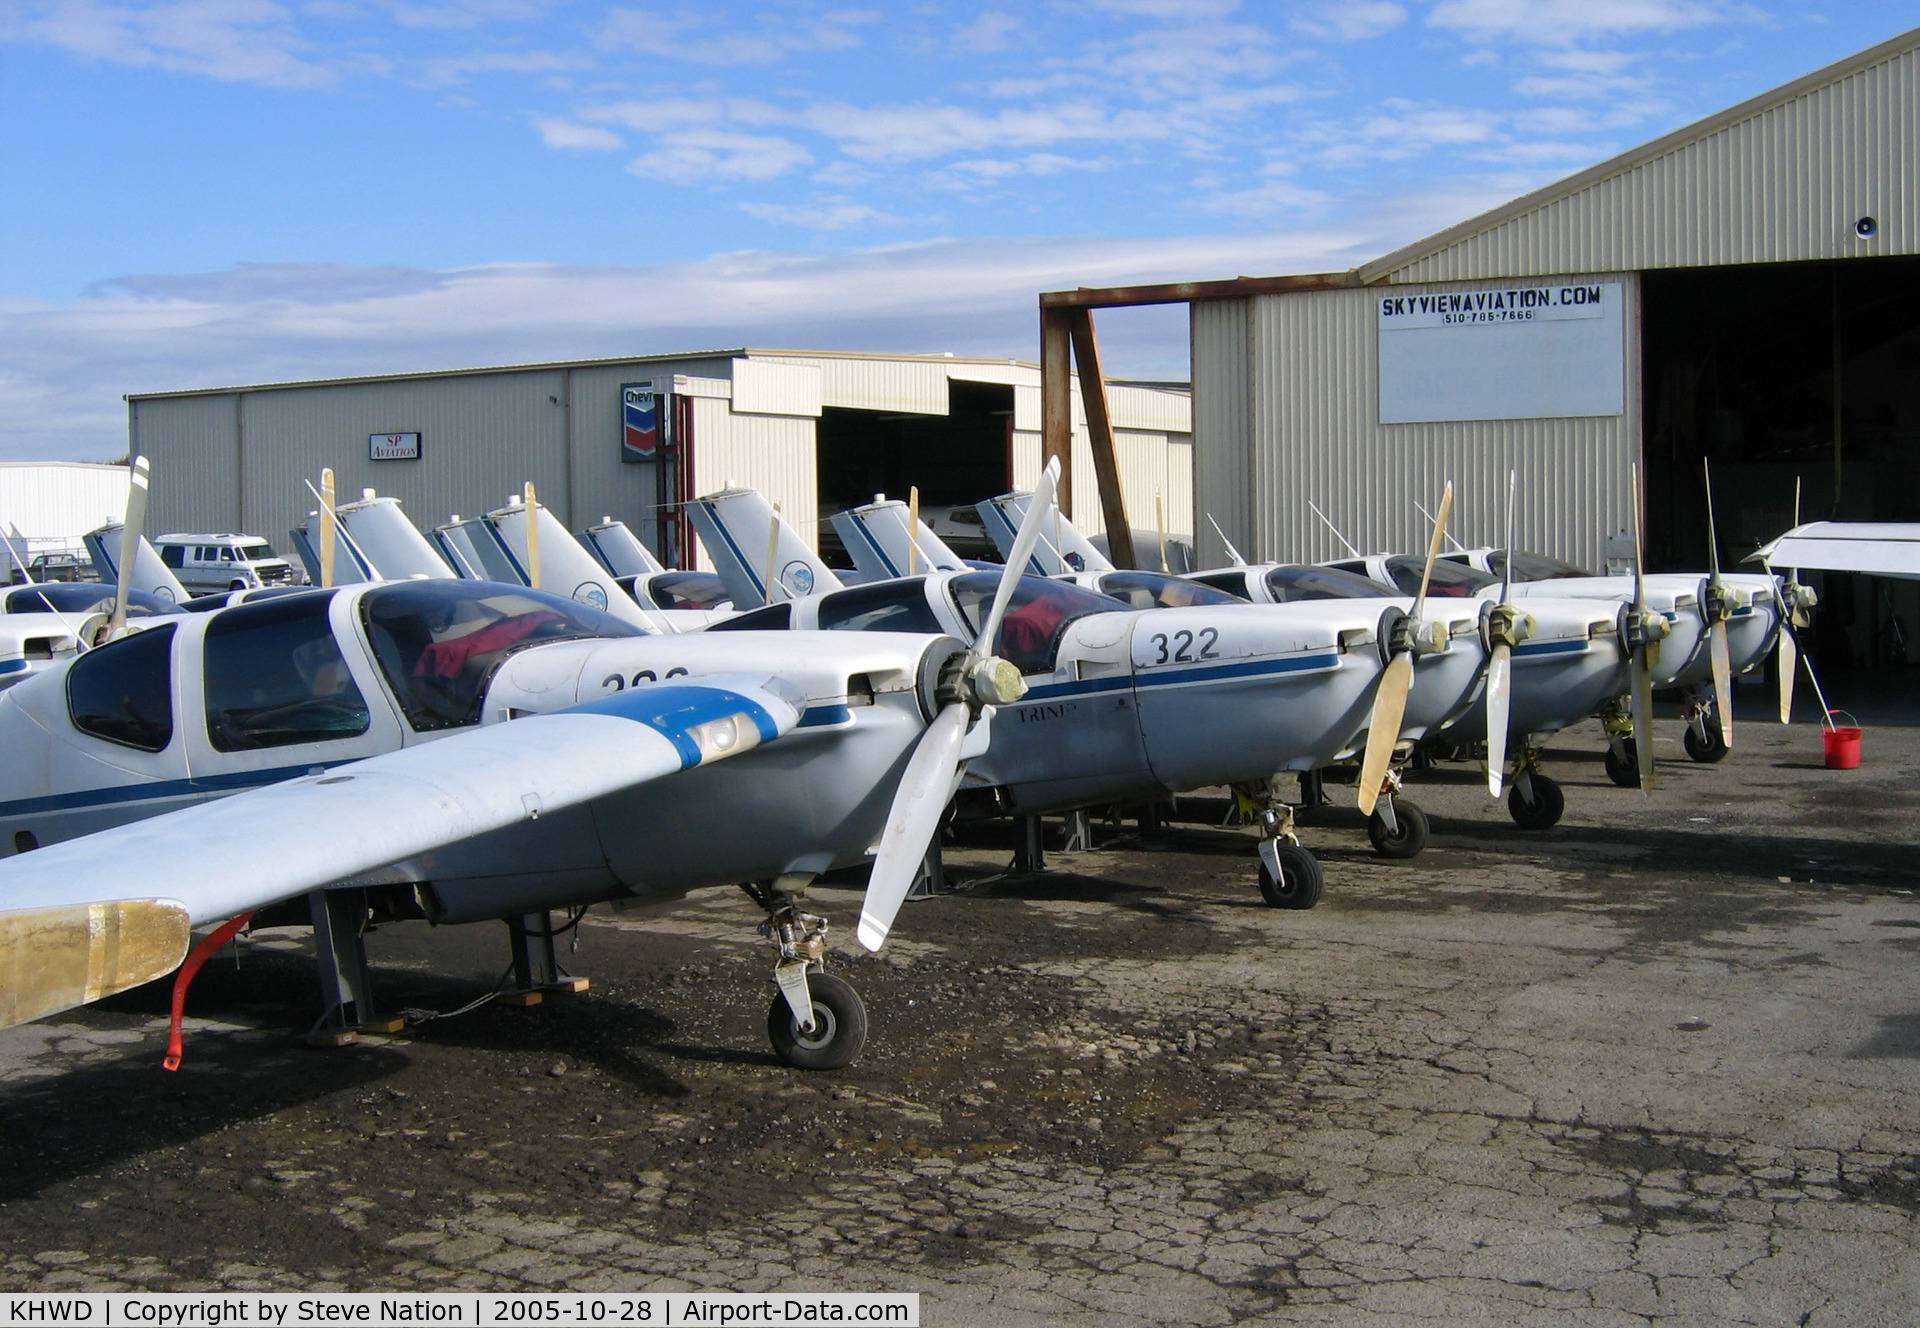 Hayward Executive Airport (HWD) - Company was converting ex-Israel Defence Force TB-20 Trinidads for civilian use in late 2005 and early 2006 - here is a line up of some of the fuselages